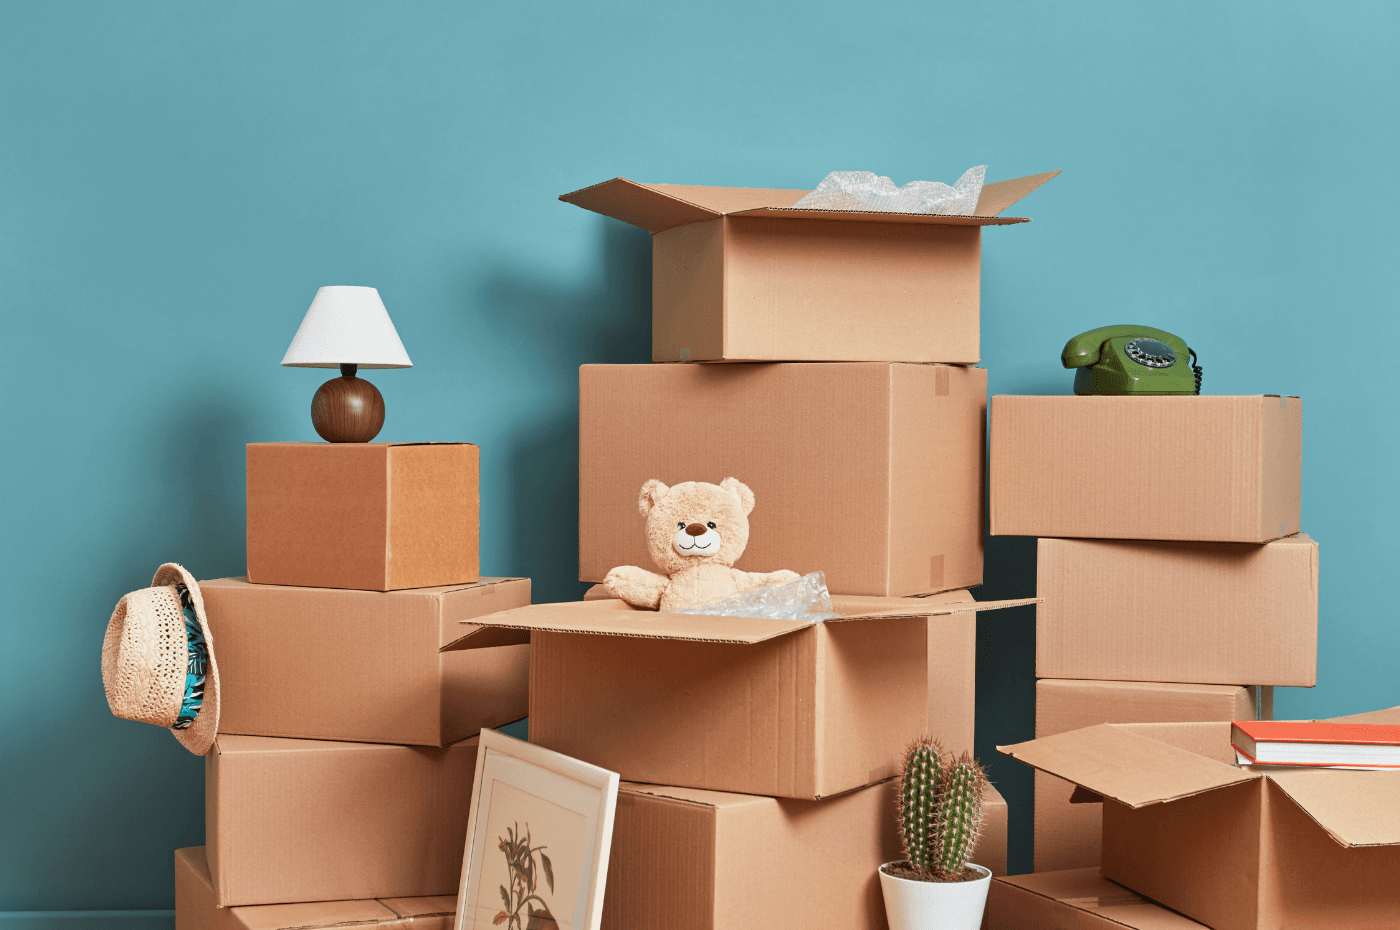 How to plan your move in 7 easy steps